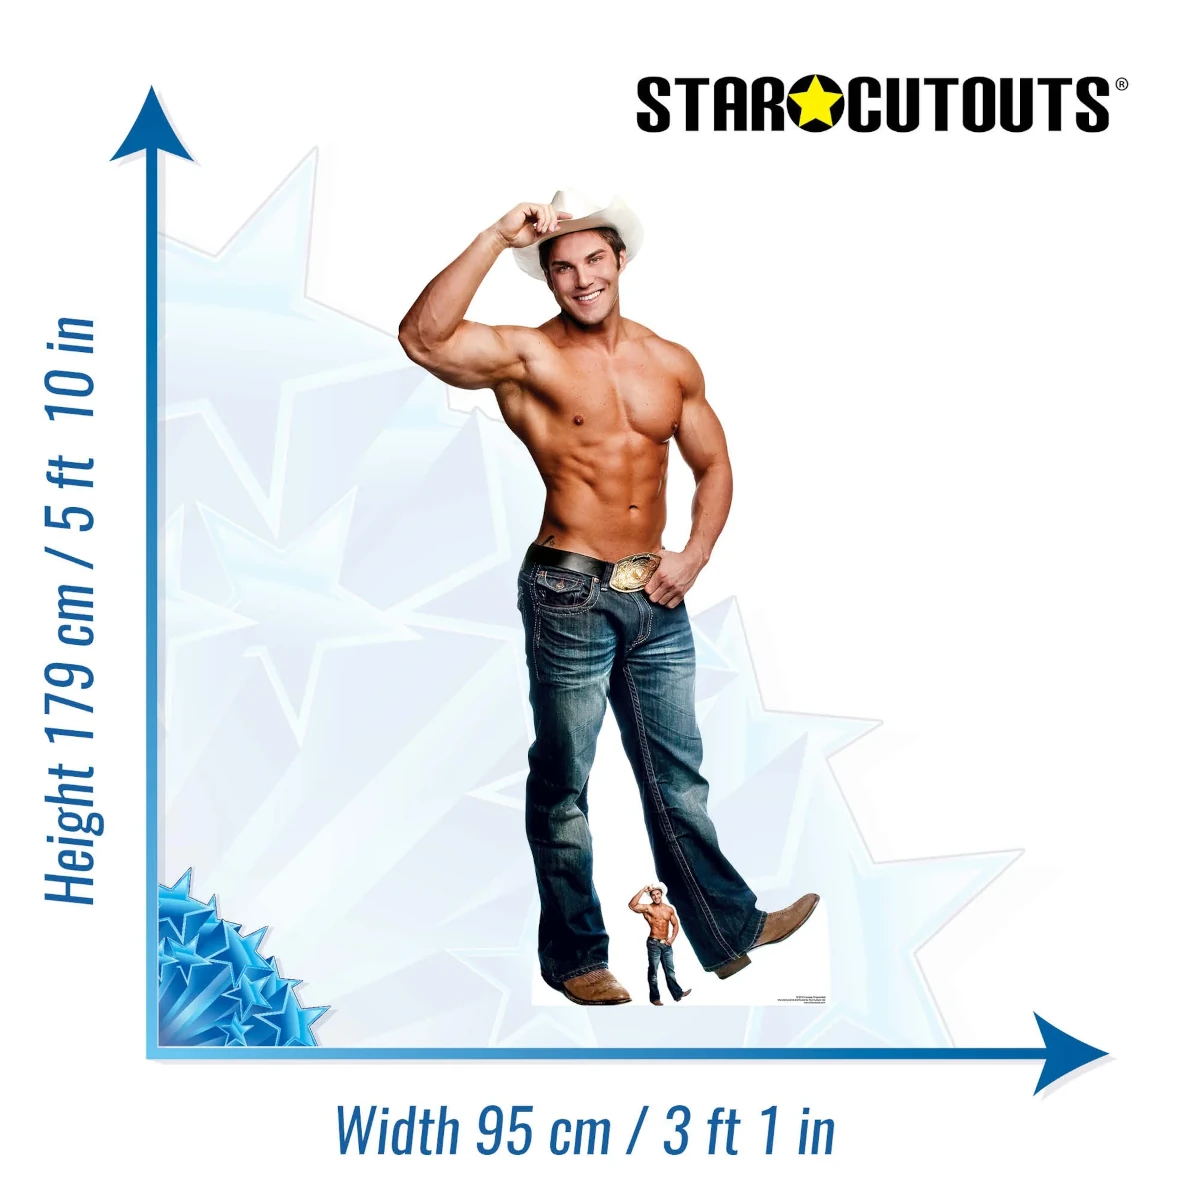 SC2155 Cowboy (Chippendales) Official Lifesize + Mini Cardboard Cutout Standee Size